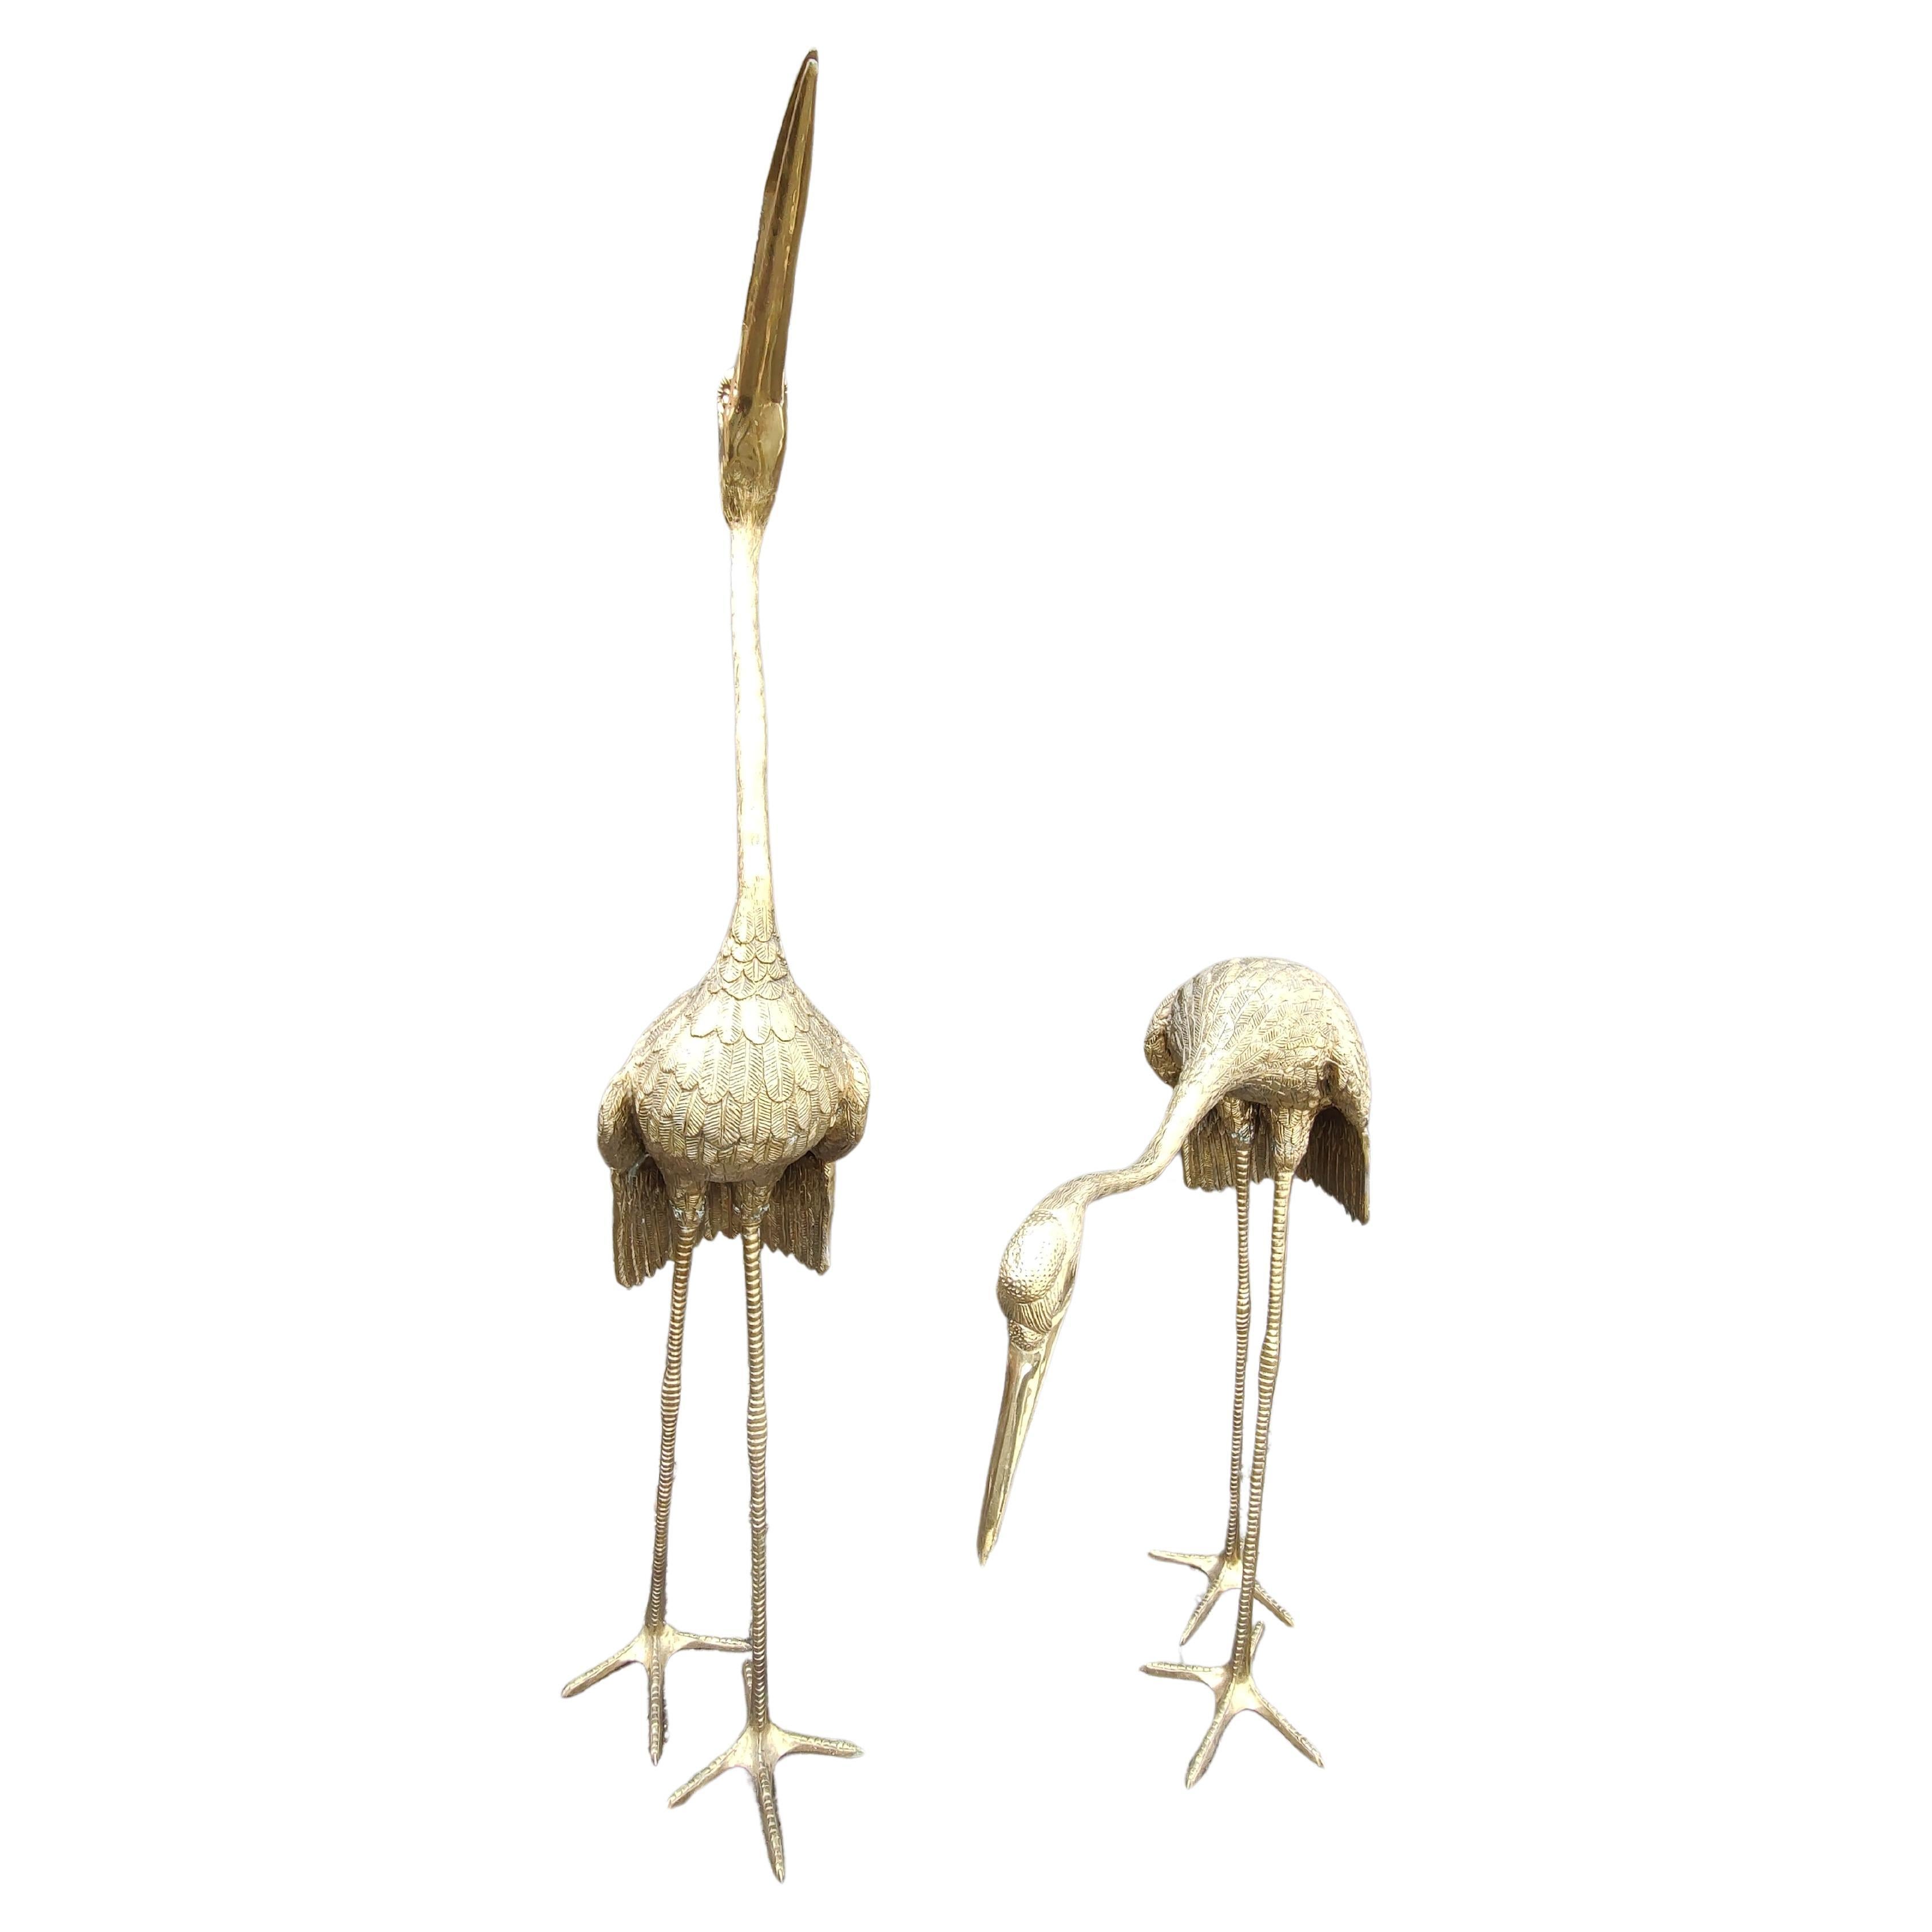 Late 20th Century Pair of Large Brass Garden Cranes / Herons Statuary Indoor - Outdoor C1970 For Sale